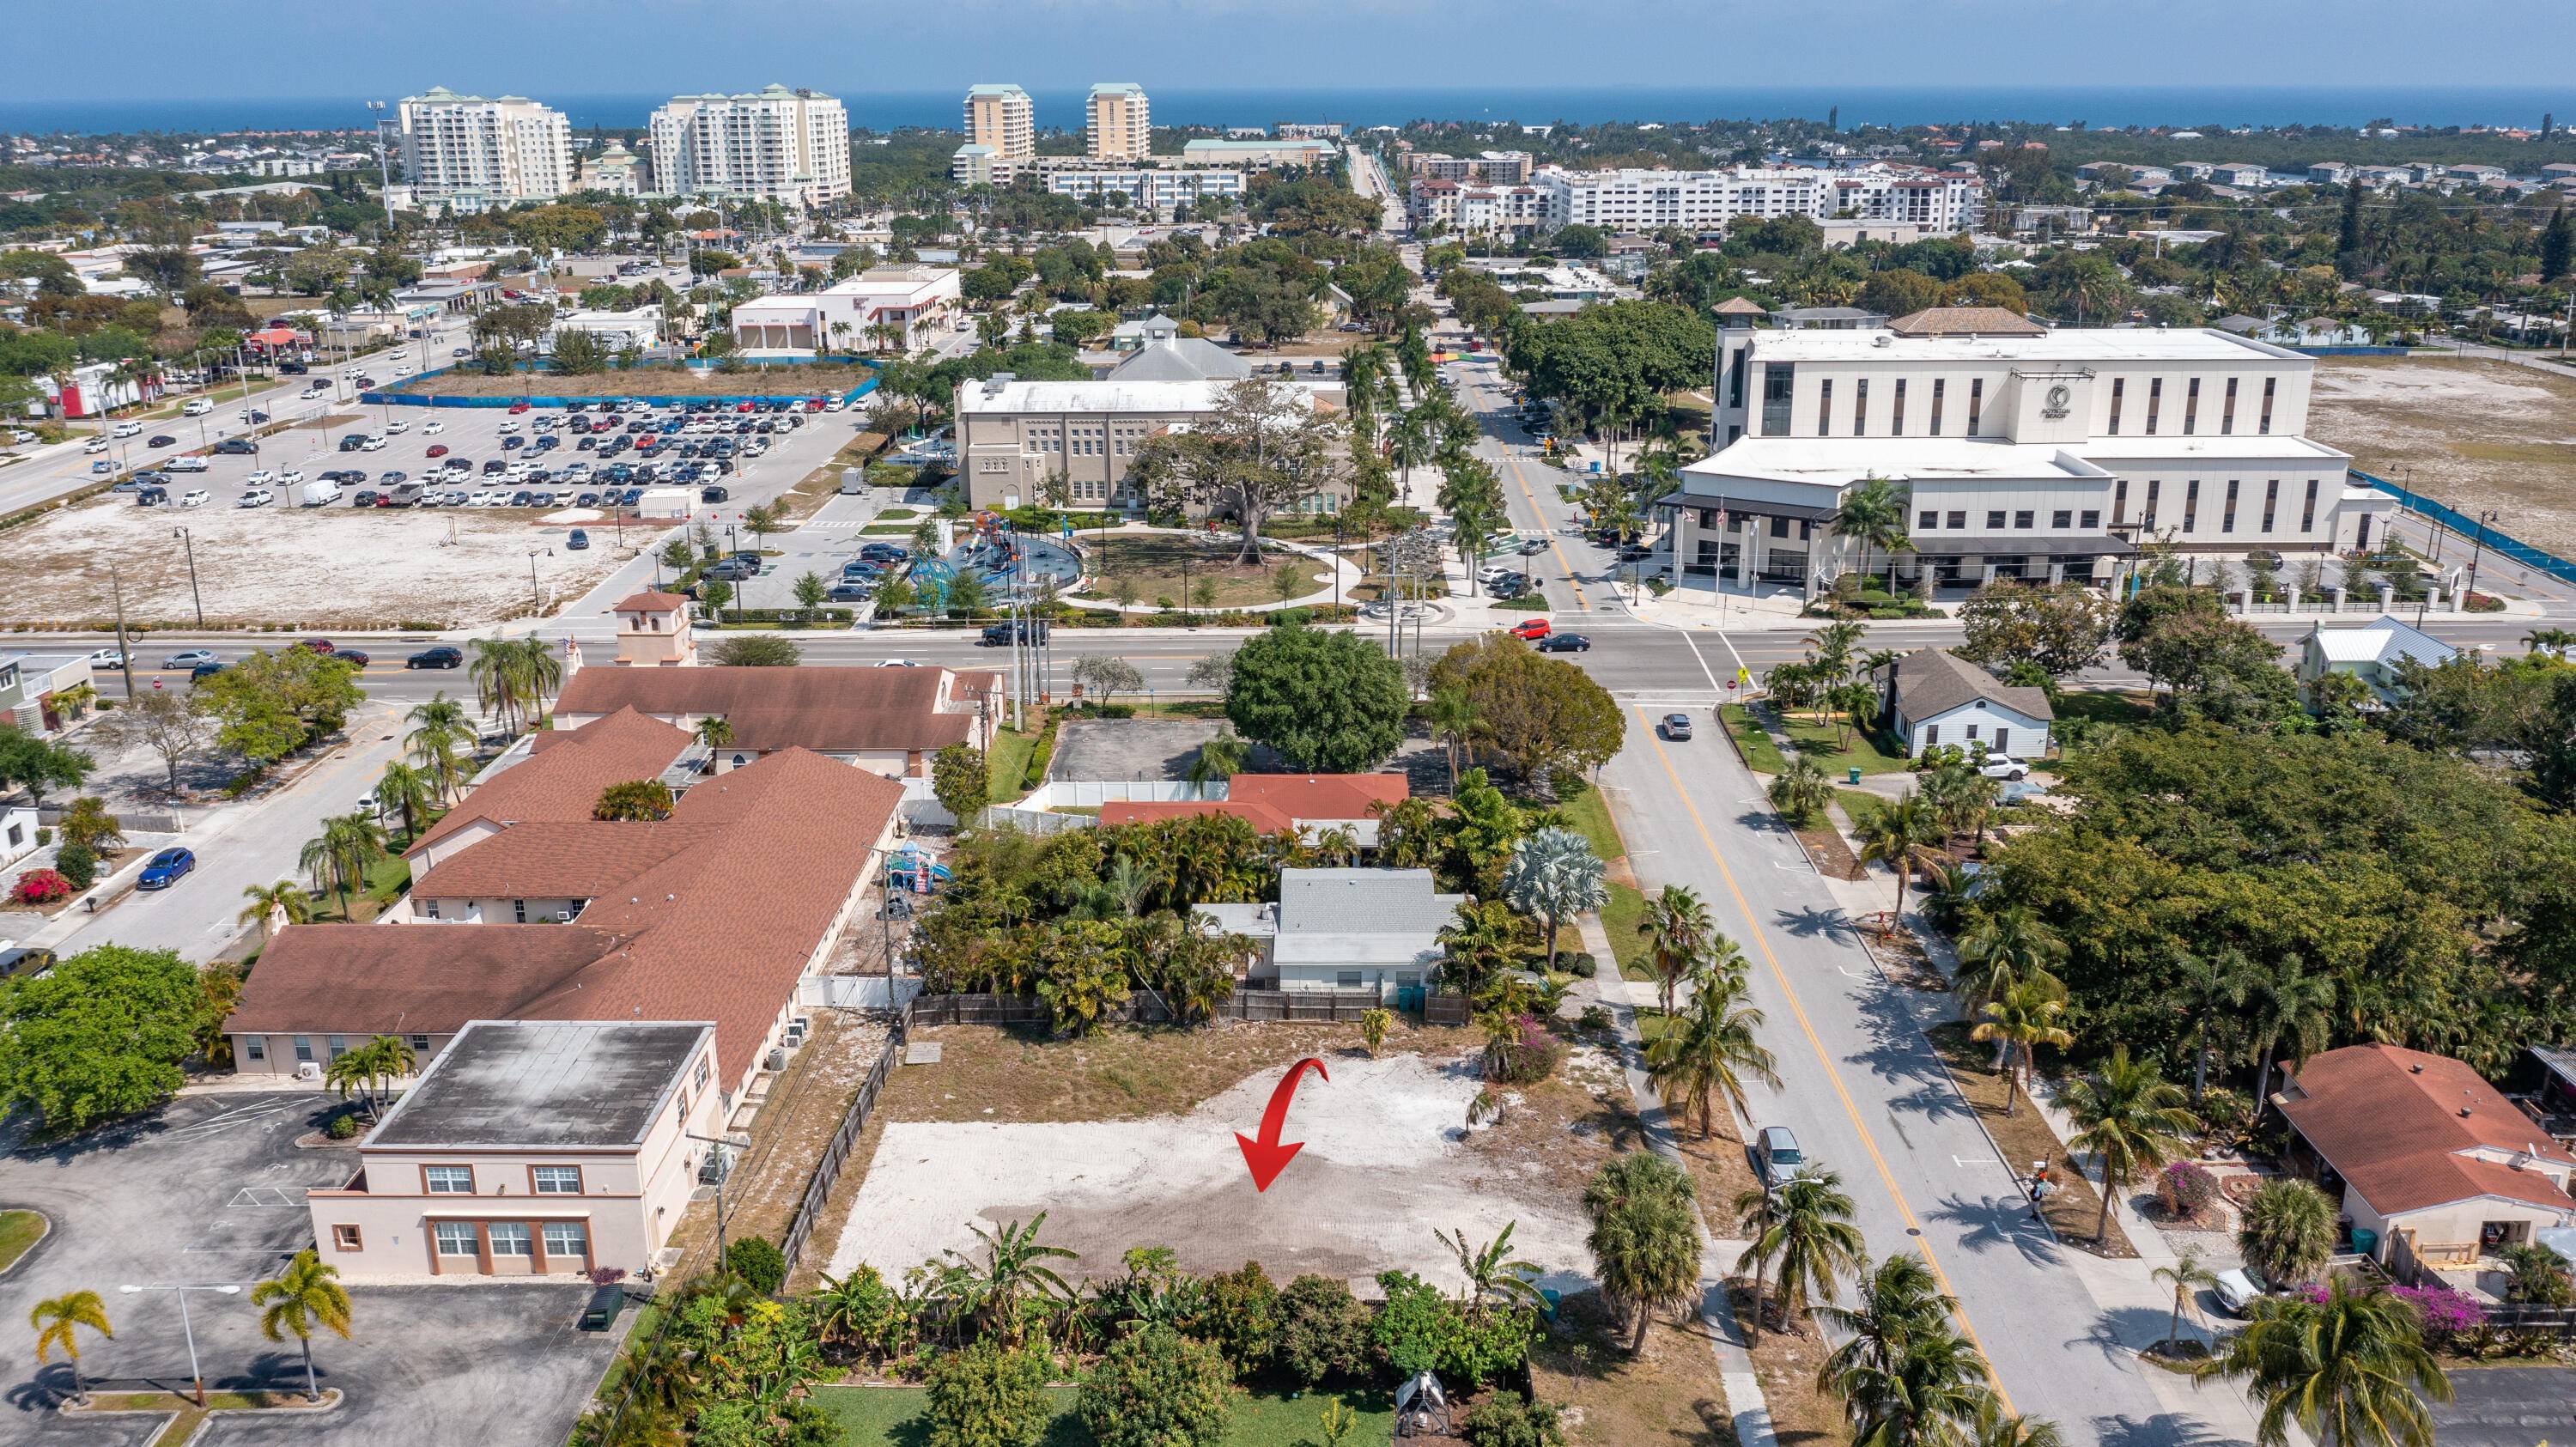 . 27 Acre lot in the heart of Boynton Beach, only a 5 minute drive to the beach.